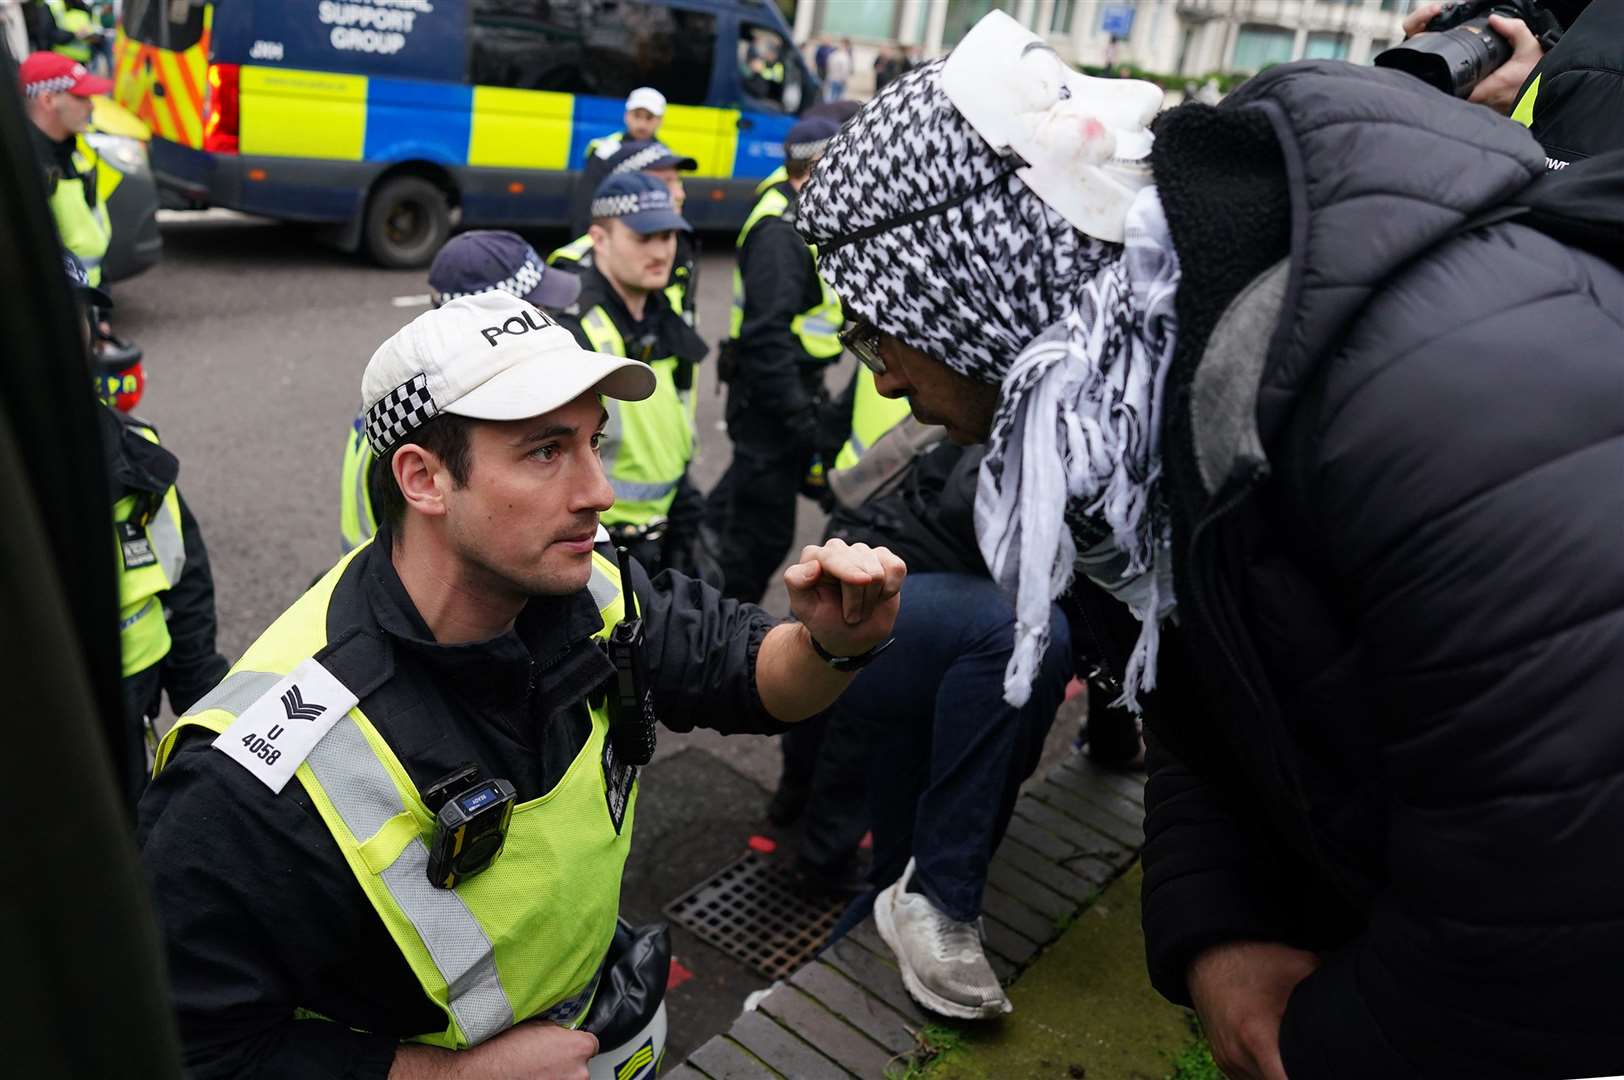 A police officer talking to a person taking part in a pro-Palestine march (Jordan Pettitt/PA)